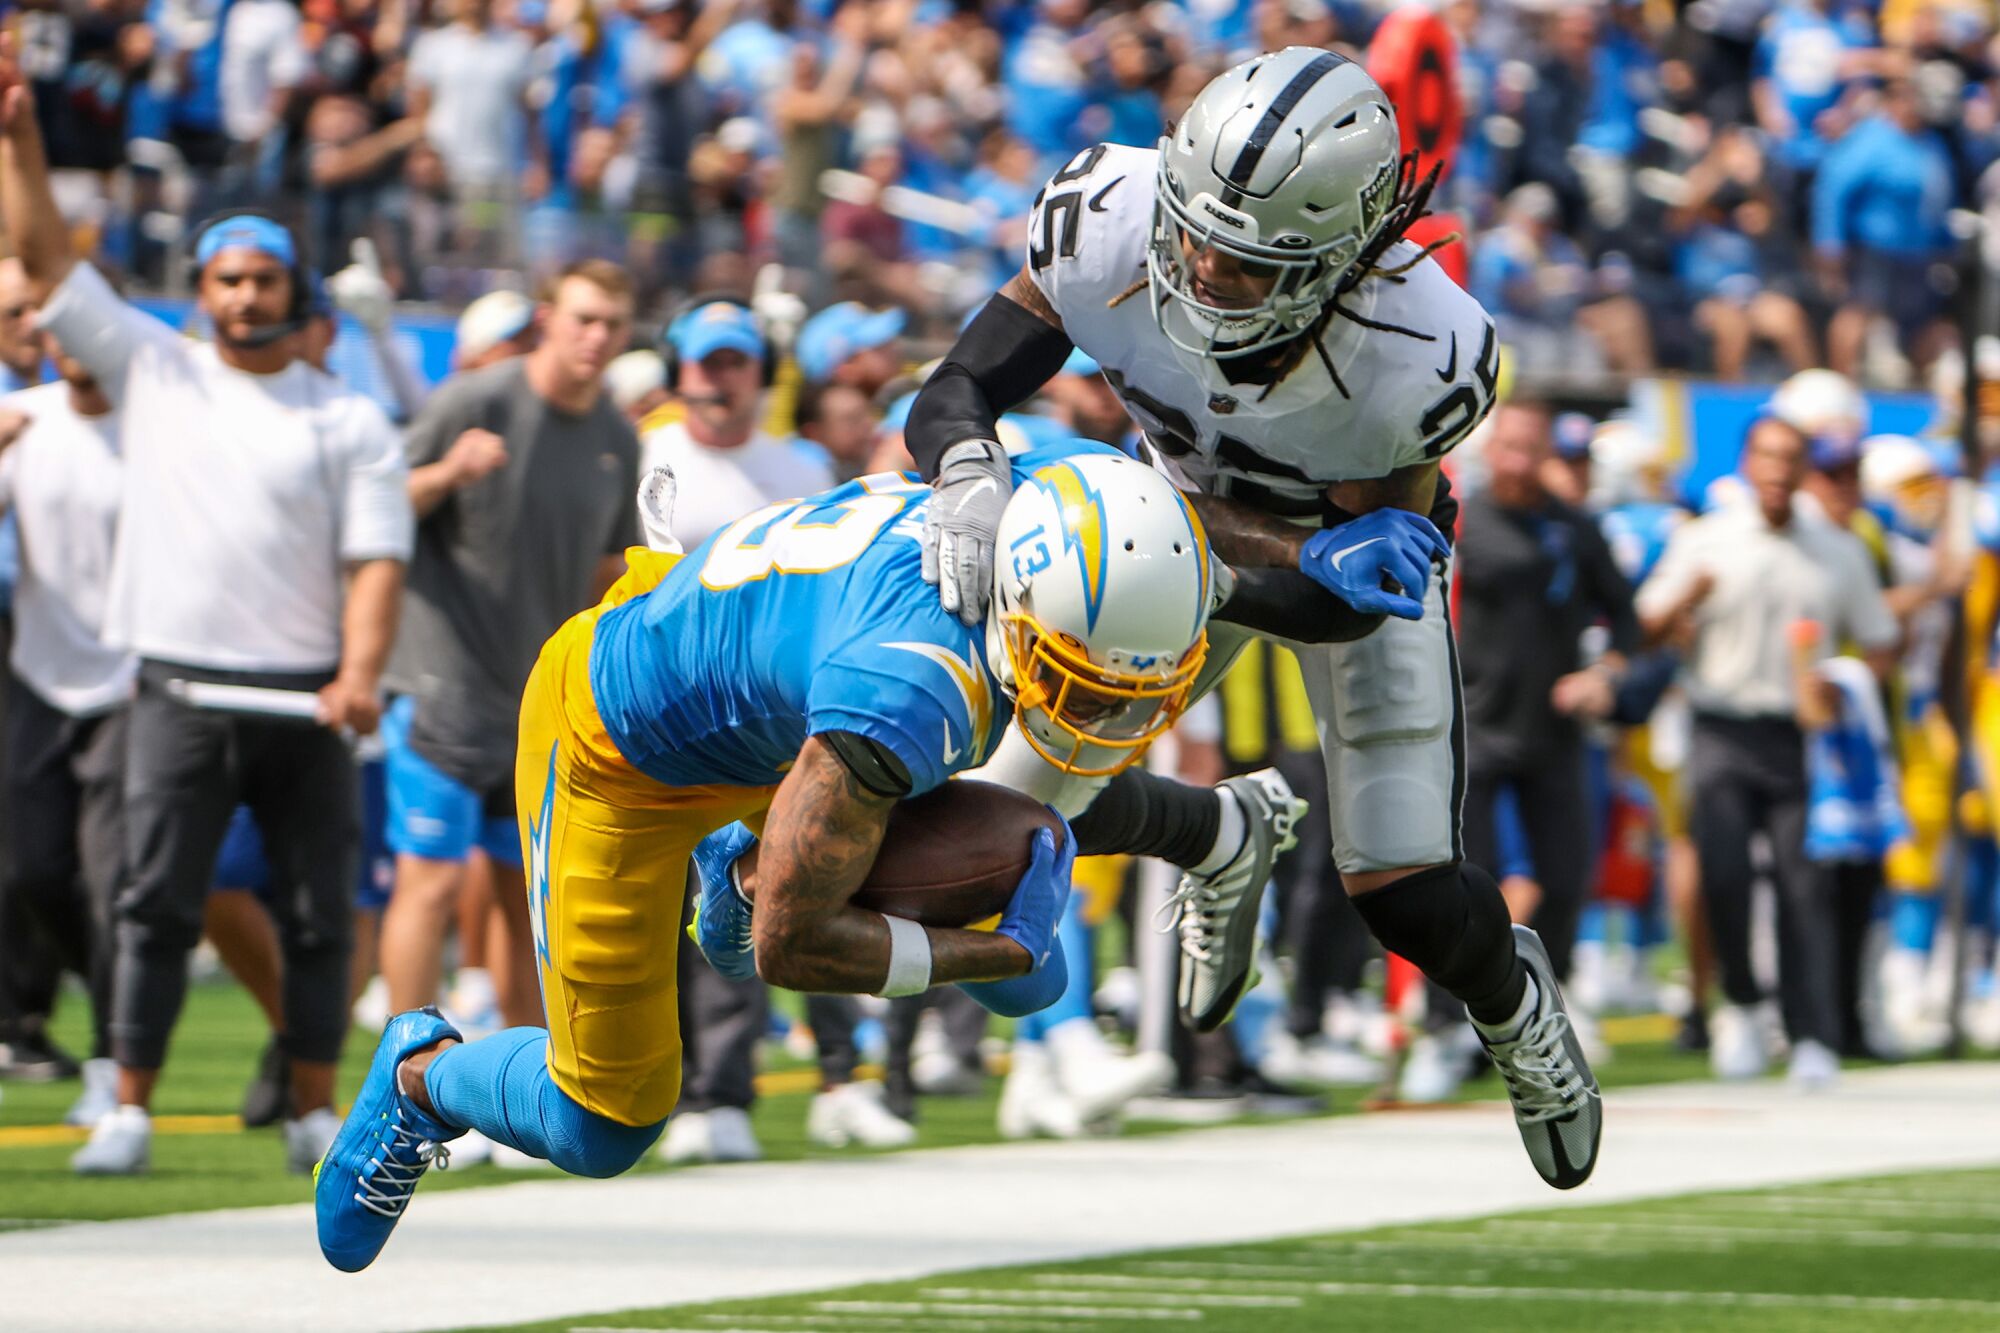 Chargers wide receiver Keenan Allen is tackled by Raiders safety Tre'von Moehrig in the second quarter.